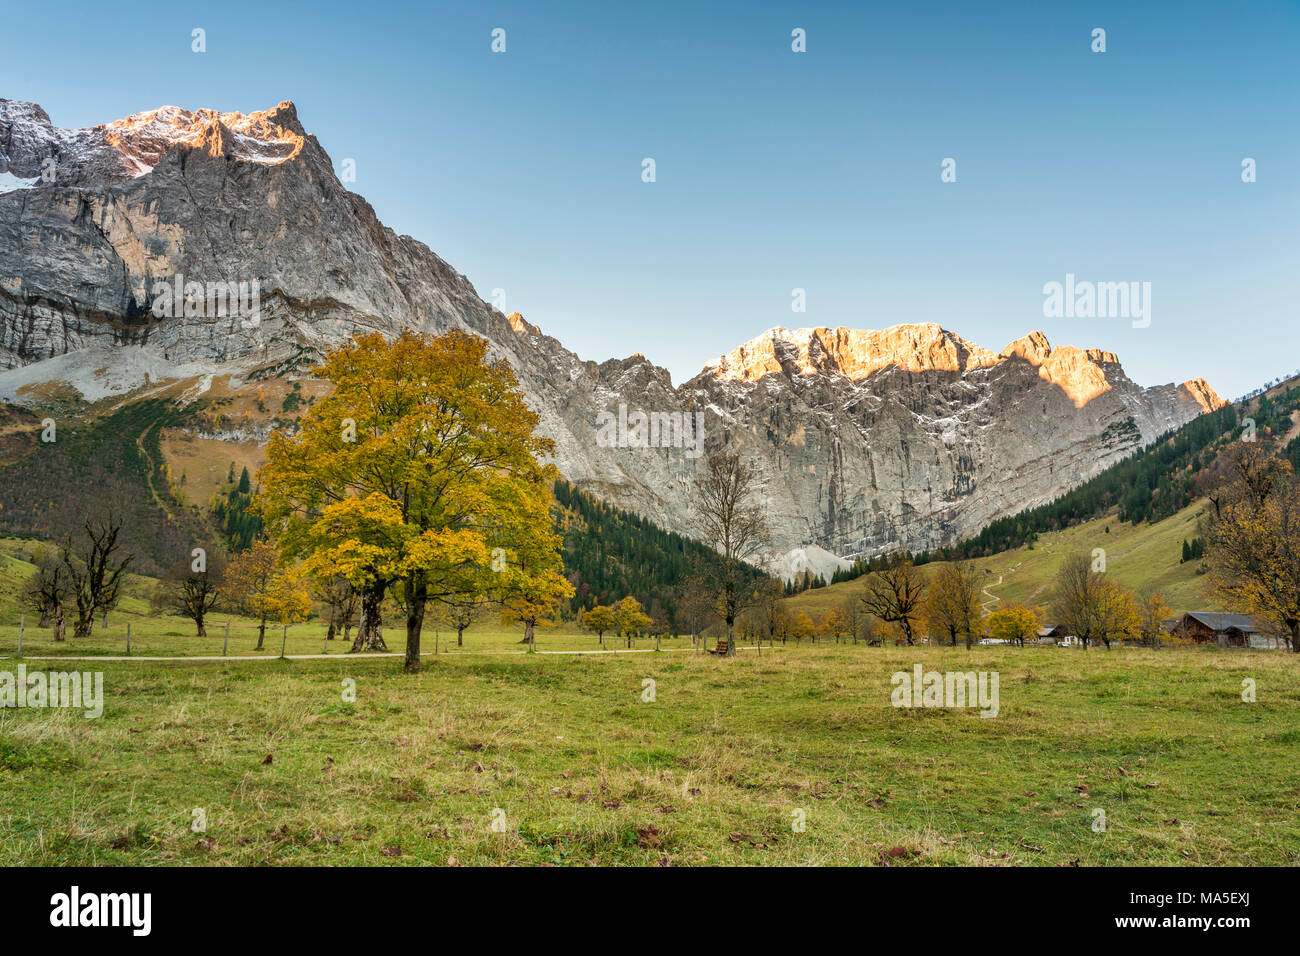 Eng, Riss Valley, Vomp, Schwaz district, Tyrol, Austria, Europe. Sycamore maple in autumn colors at sunrise with the Mount Spritzkar and Mount Grubenkar Stock Photo